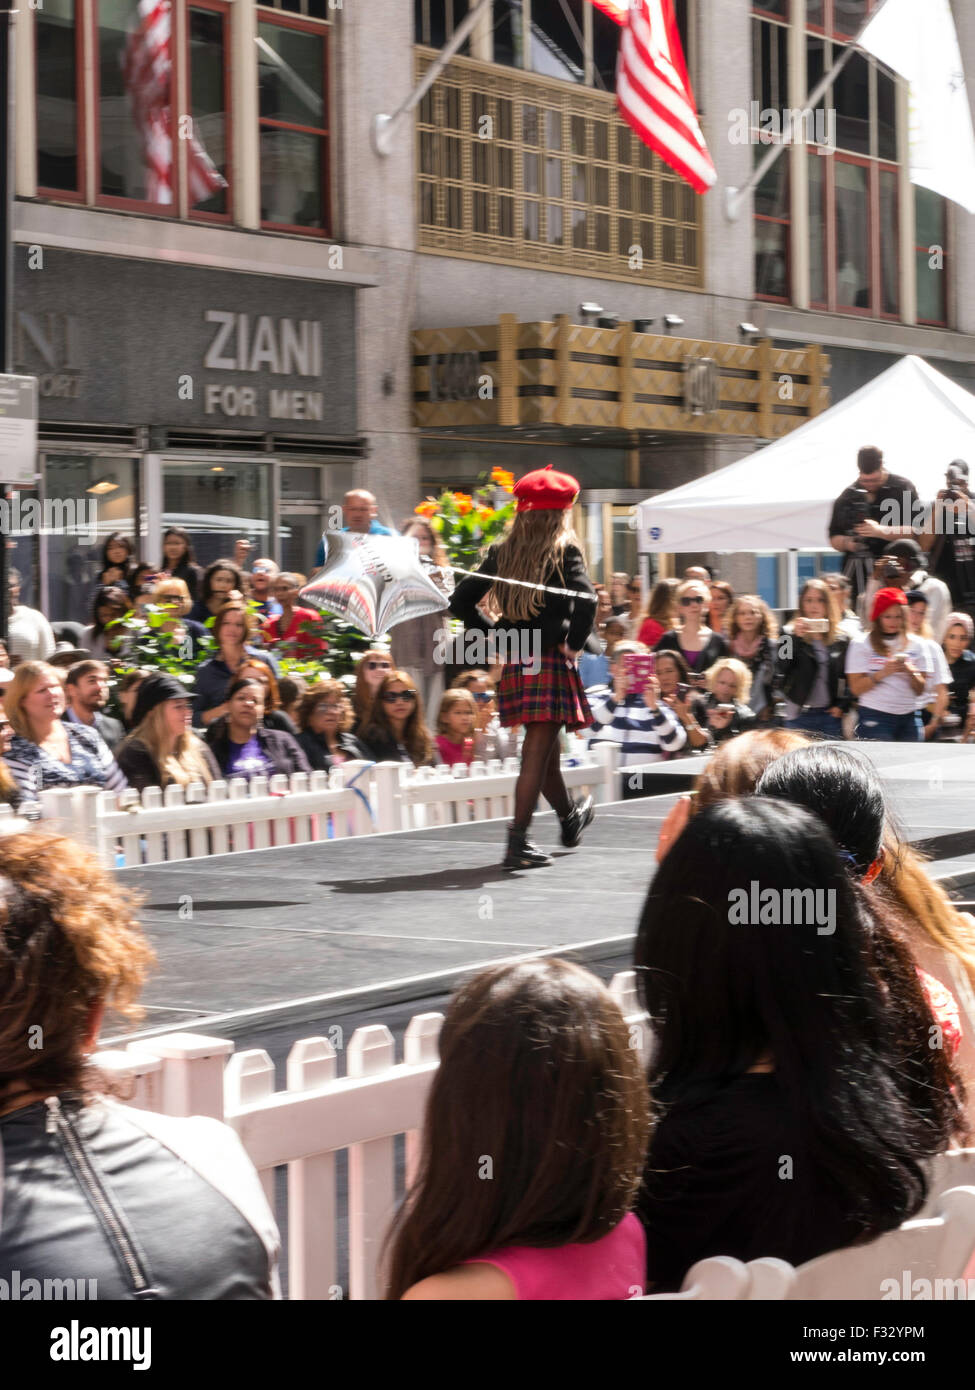 Children's Clothes Fashion Show, Best of France 2015 Street Fair Event, NYC, USA Stock Photo